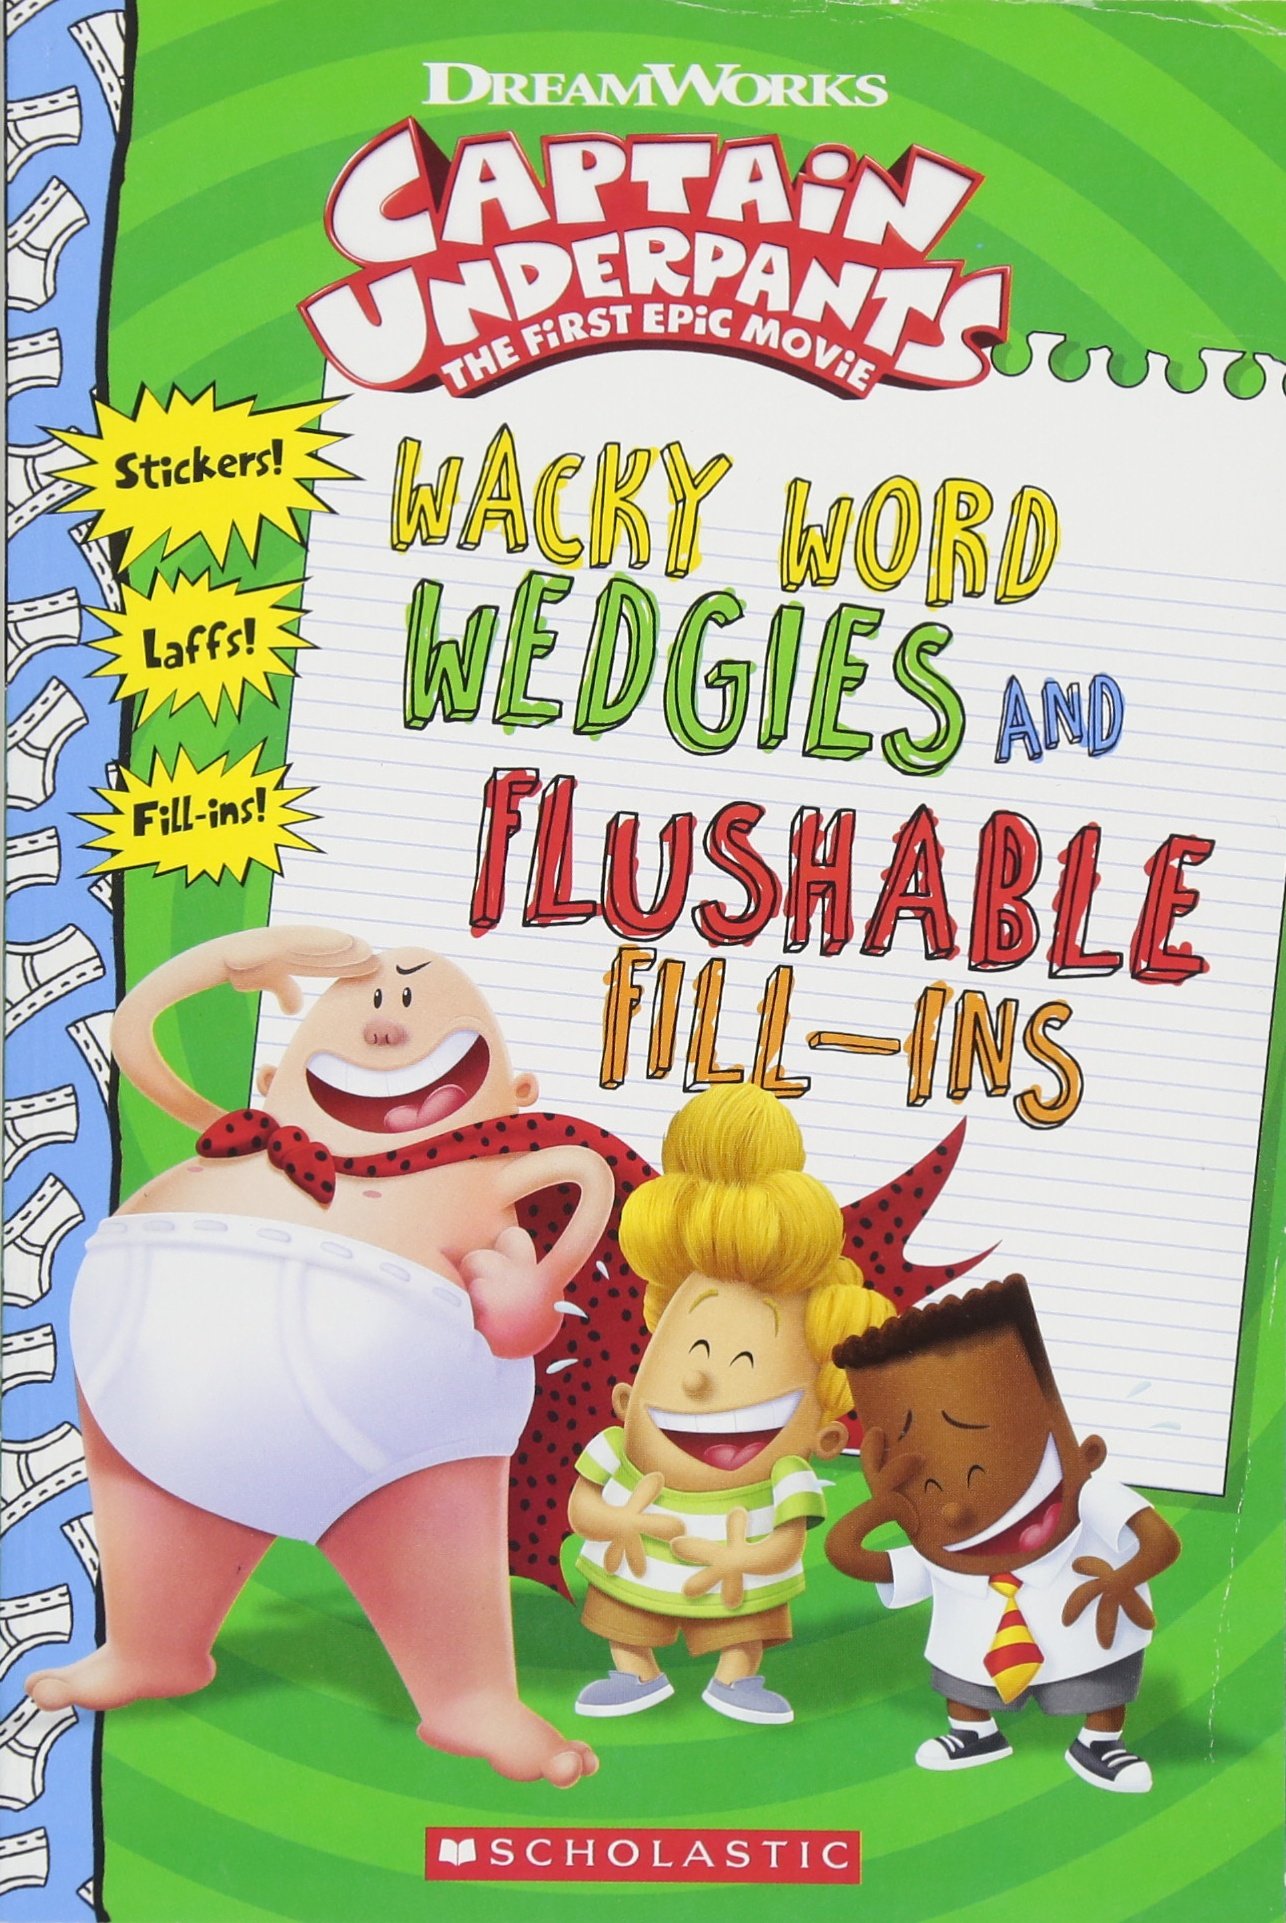 Wacky Word Wedgies and Flushable Fill-ins (Captain Underpants Movie) (Captain Underpants)